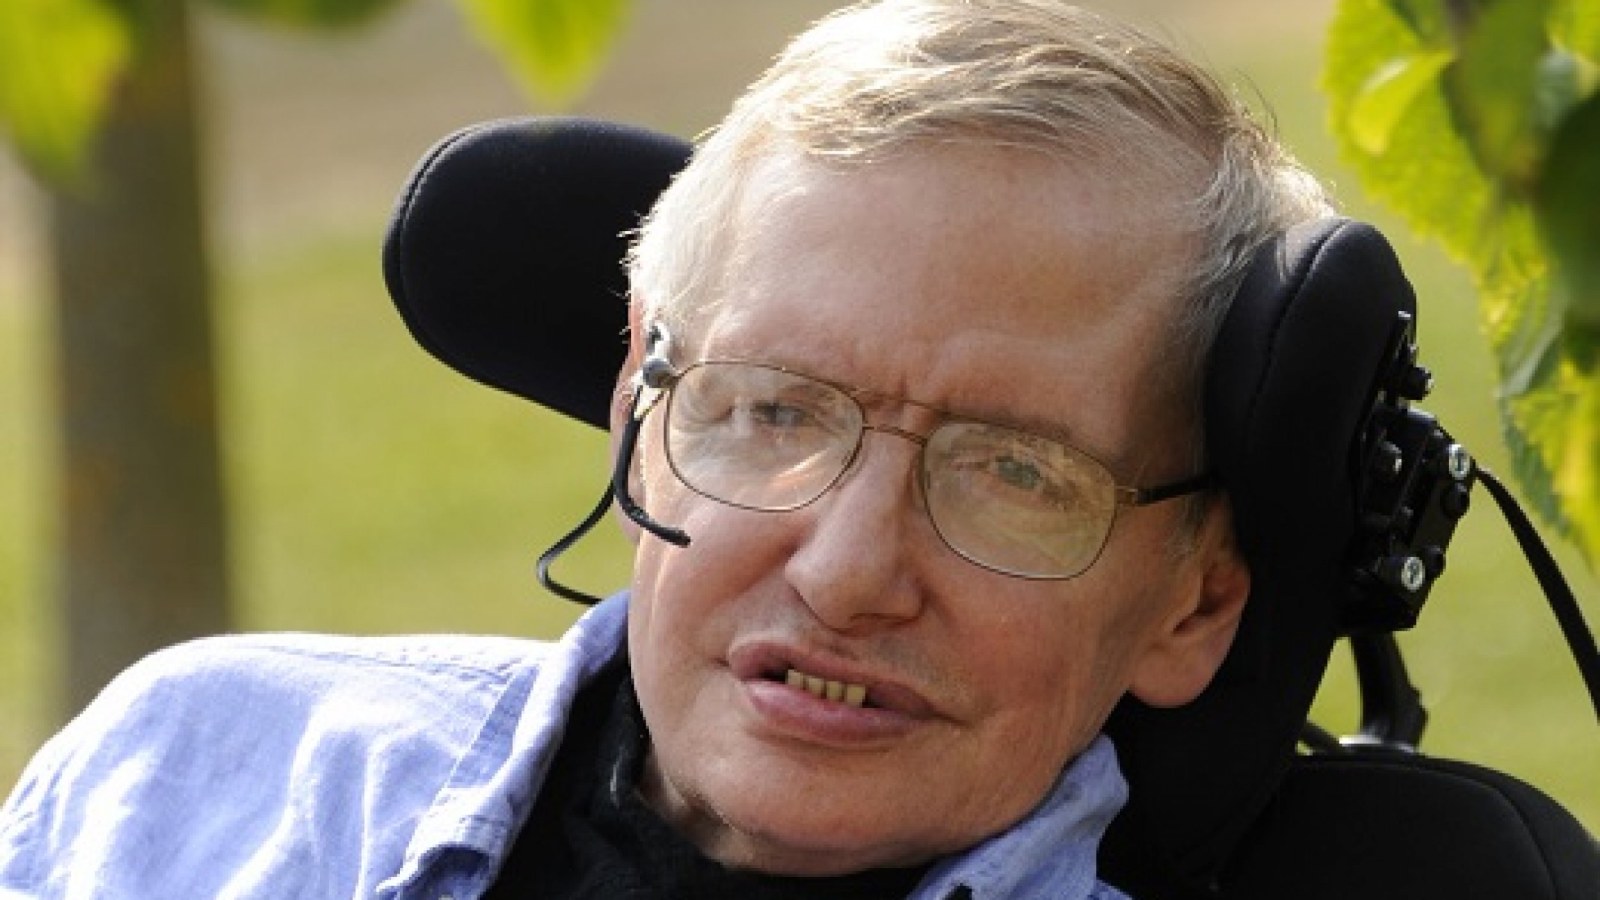 Stephen Hawking Memoir 'My Brief History': Acclaimed Physicist With ALS  Opens Up, Sort Of